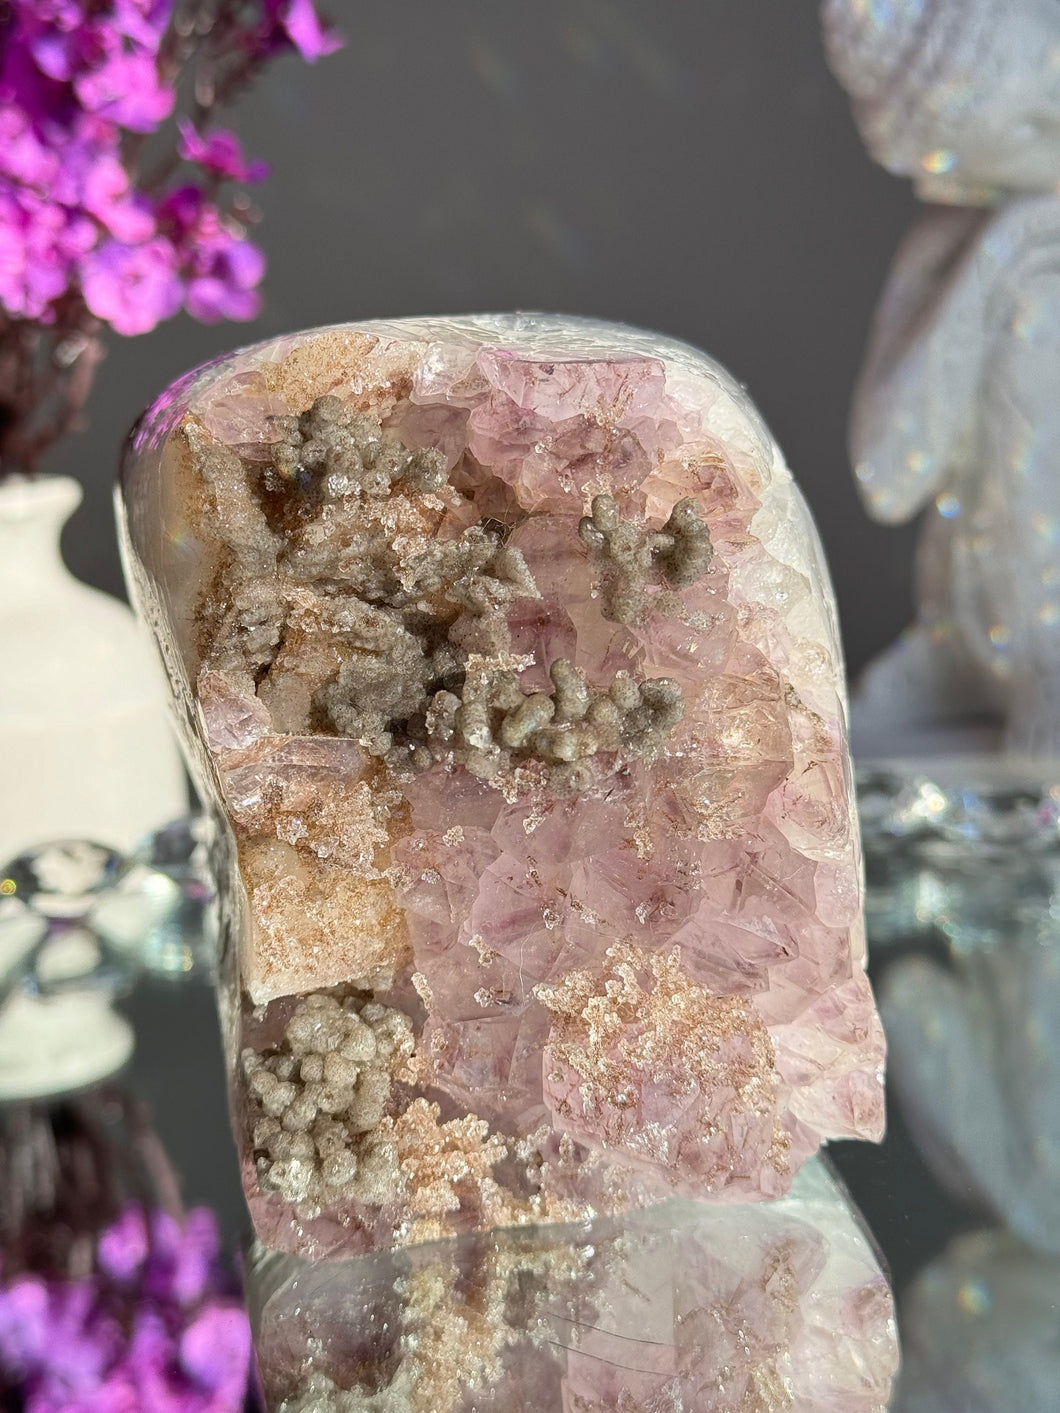 amethyst cluster with agate and quartz banding  2654